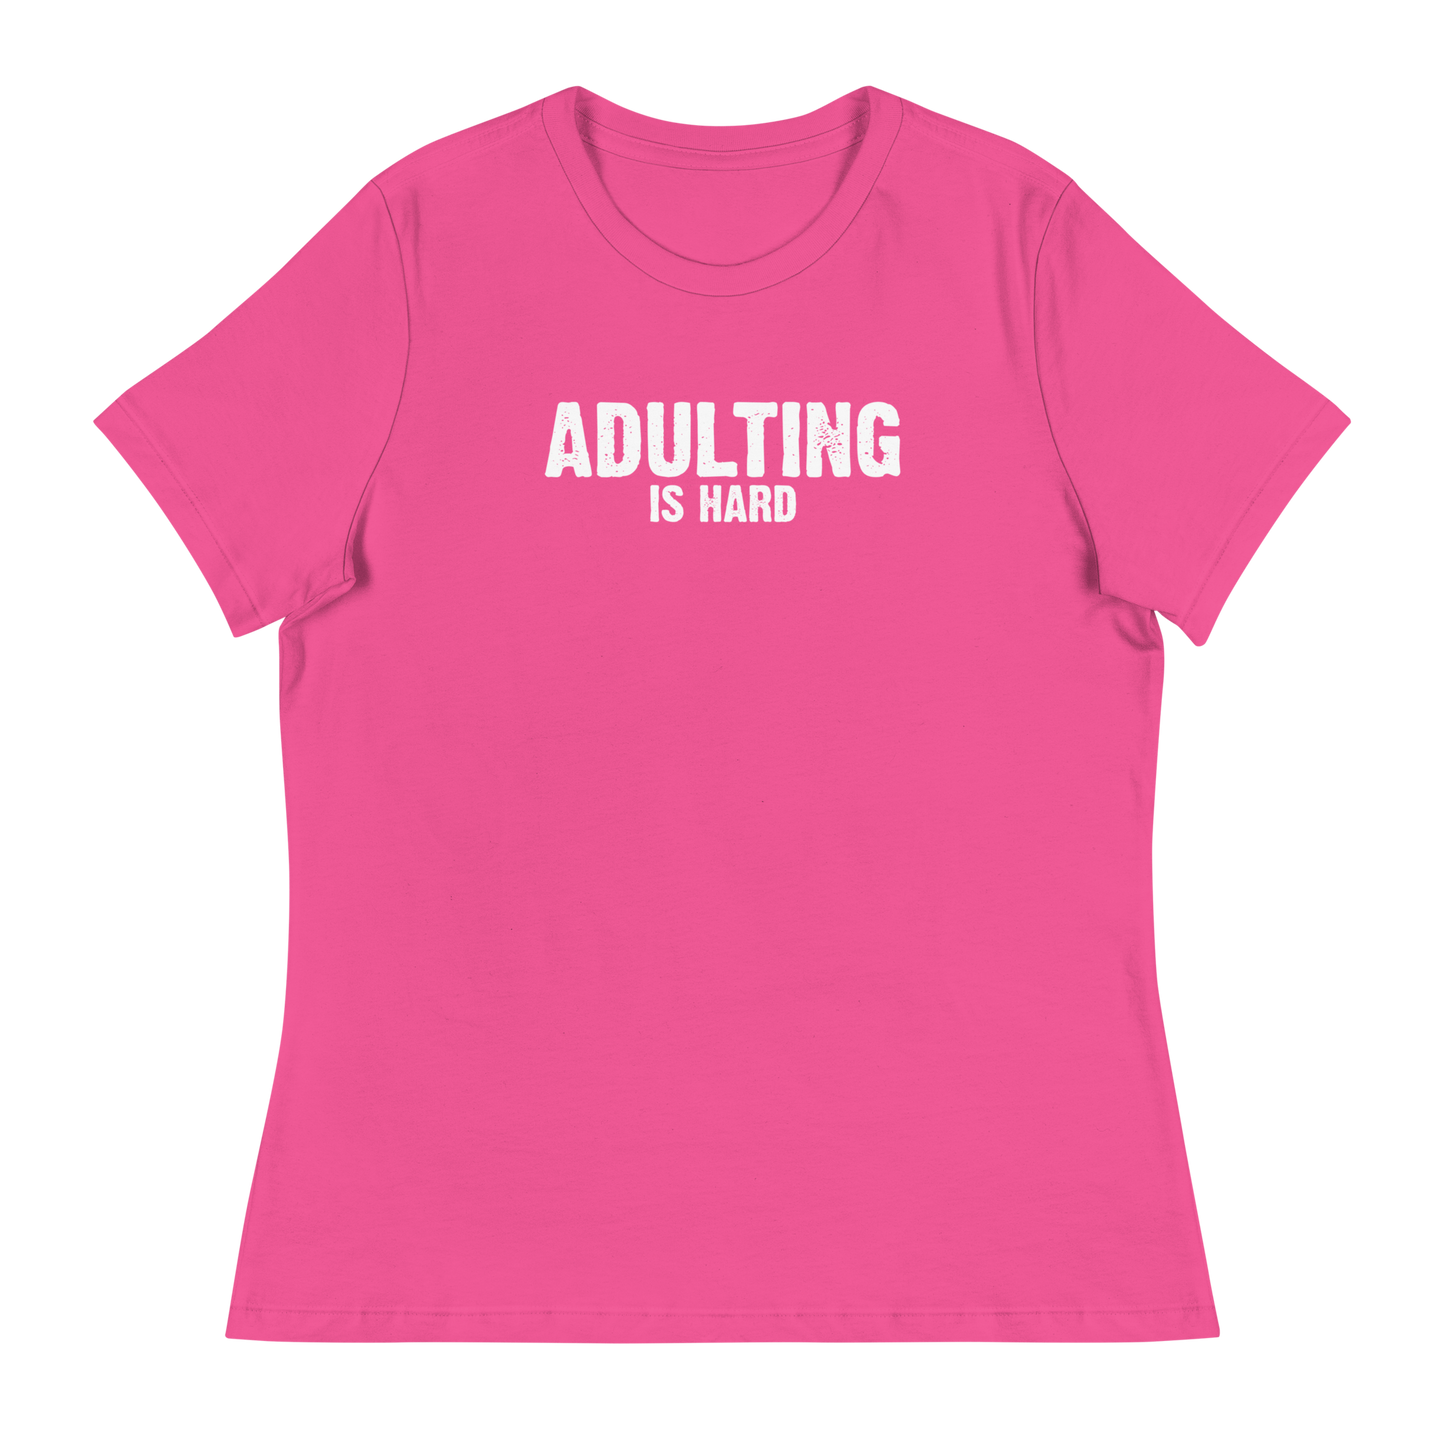 Women's - Adulting Is Hard - Funny T-Shirt